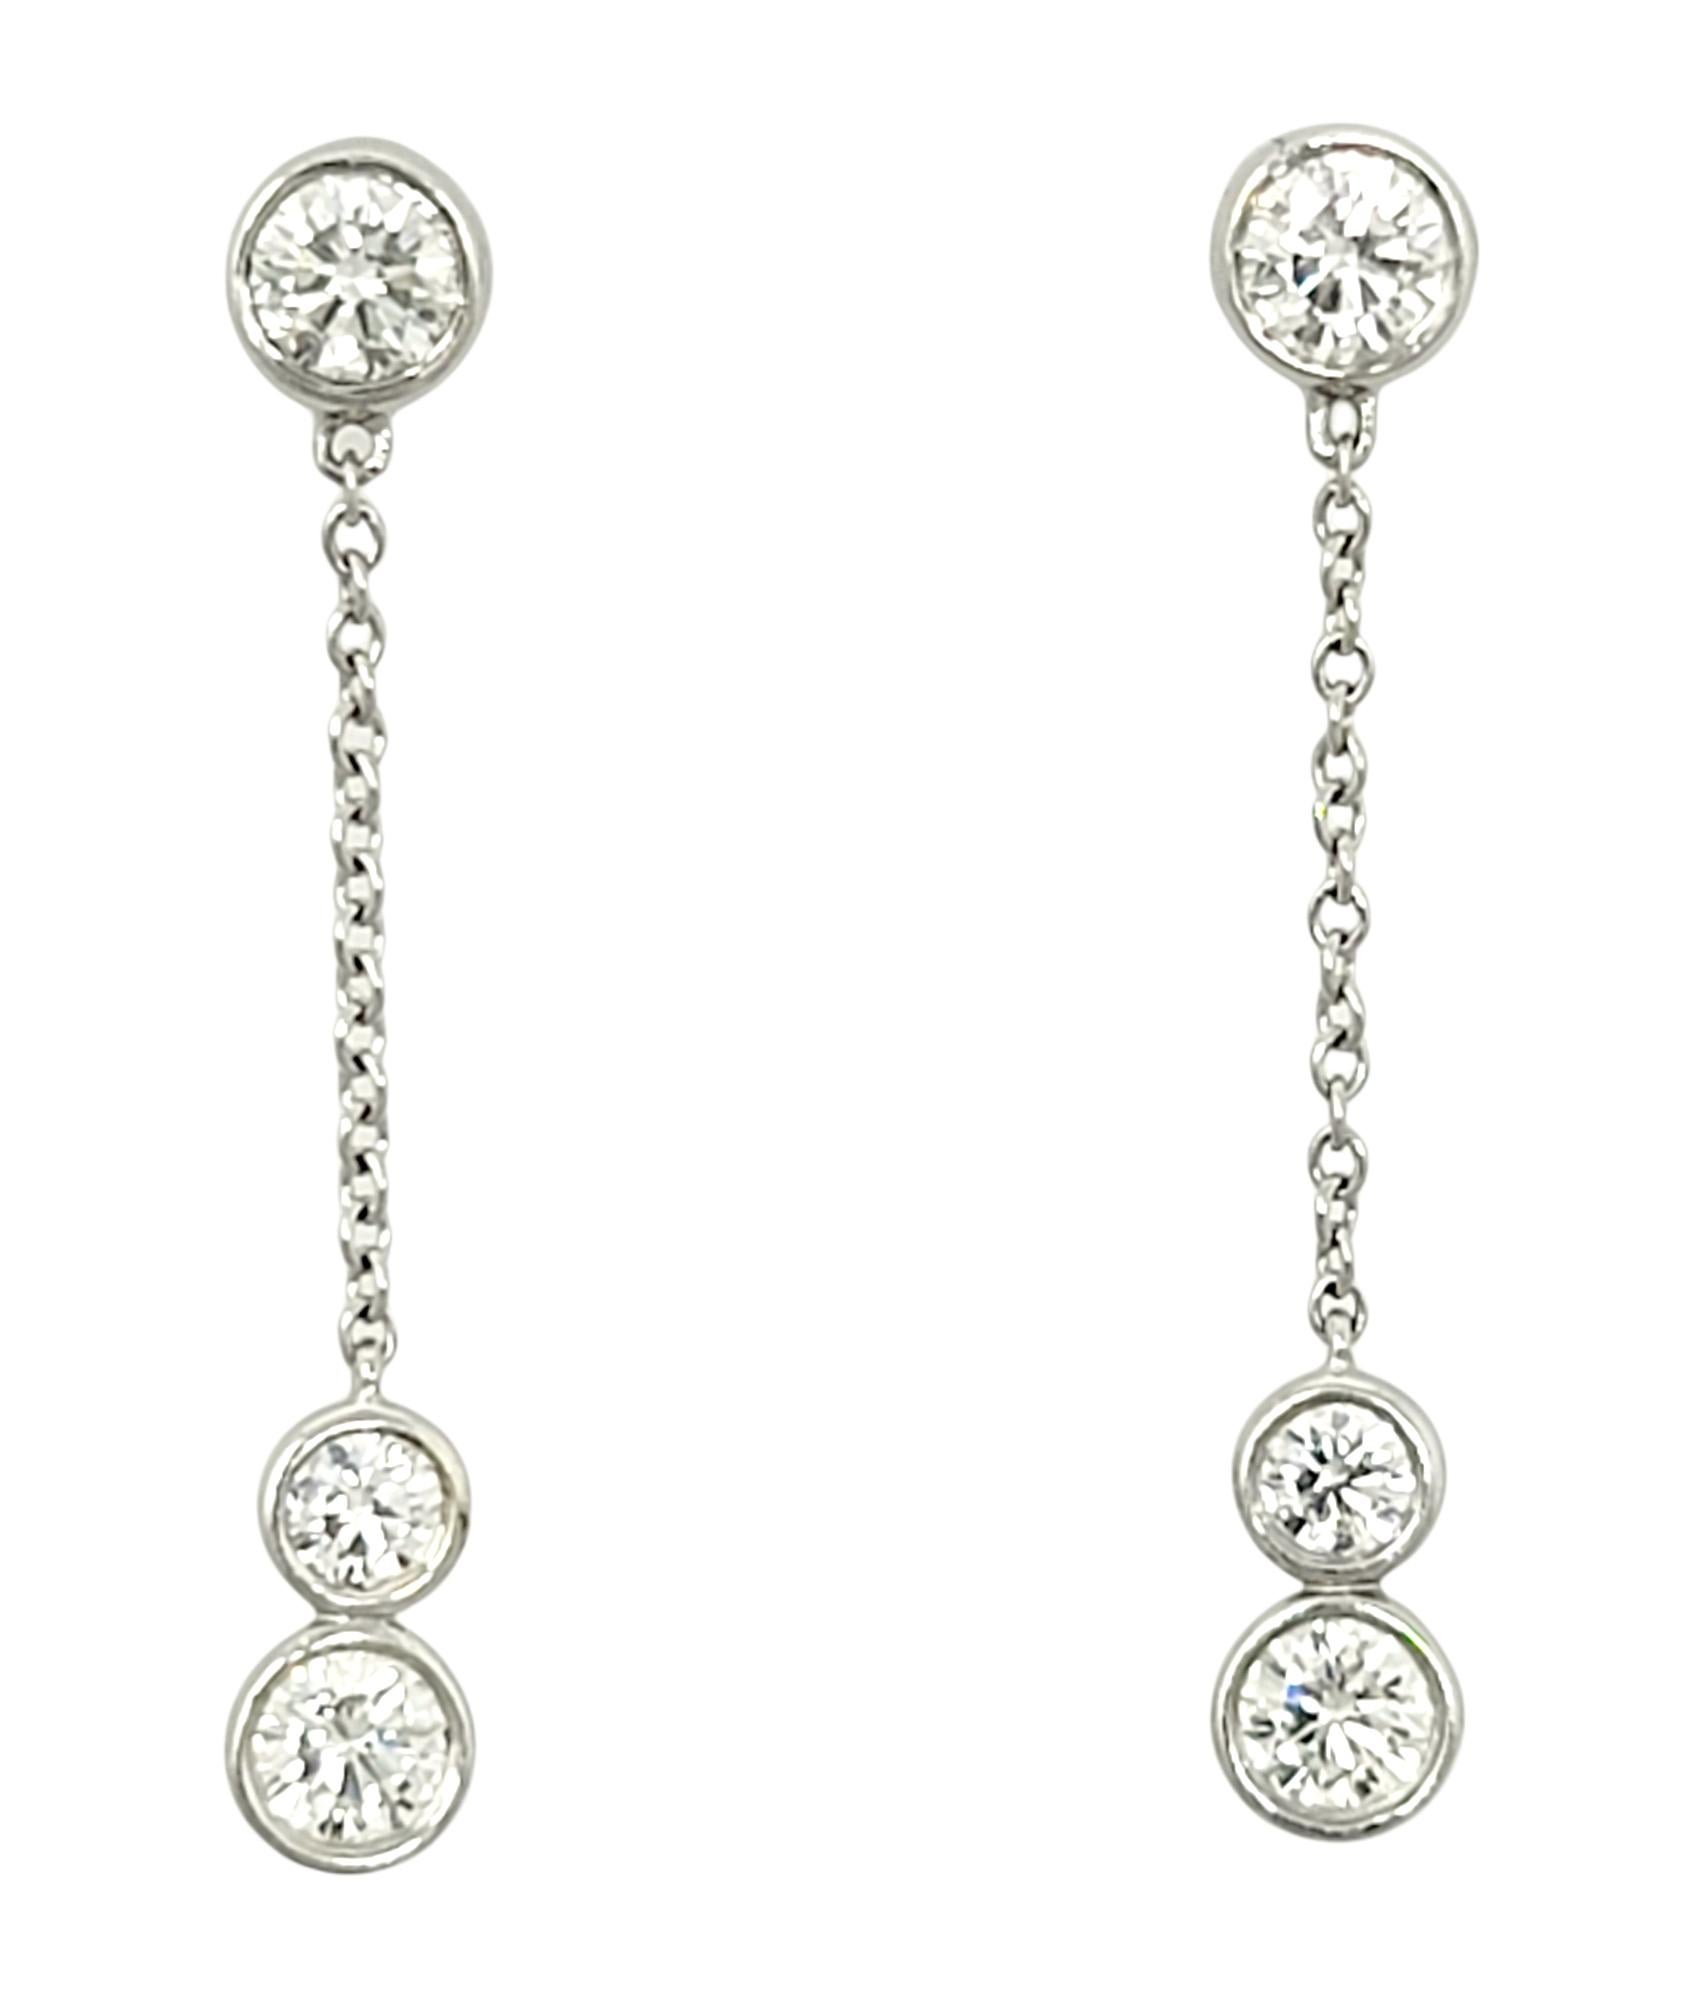 Gorgeous diamond dangle earrings from Elsa Peretti's 'Diamonds by the Yard' collection for Tiffany & Co.. The delicate style and gentle movement make these sparkling beauties dance in the light! 

Earring type: Dangle
Metal: Platinum 
Weight: 3.4